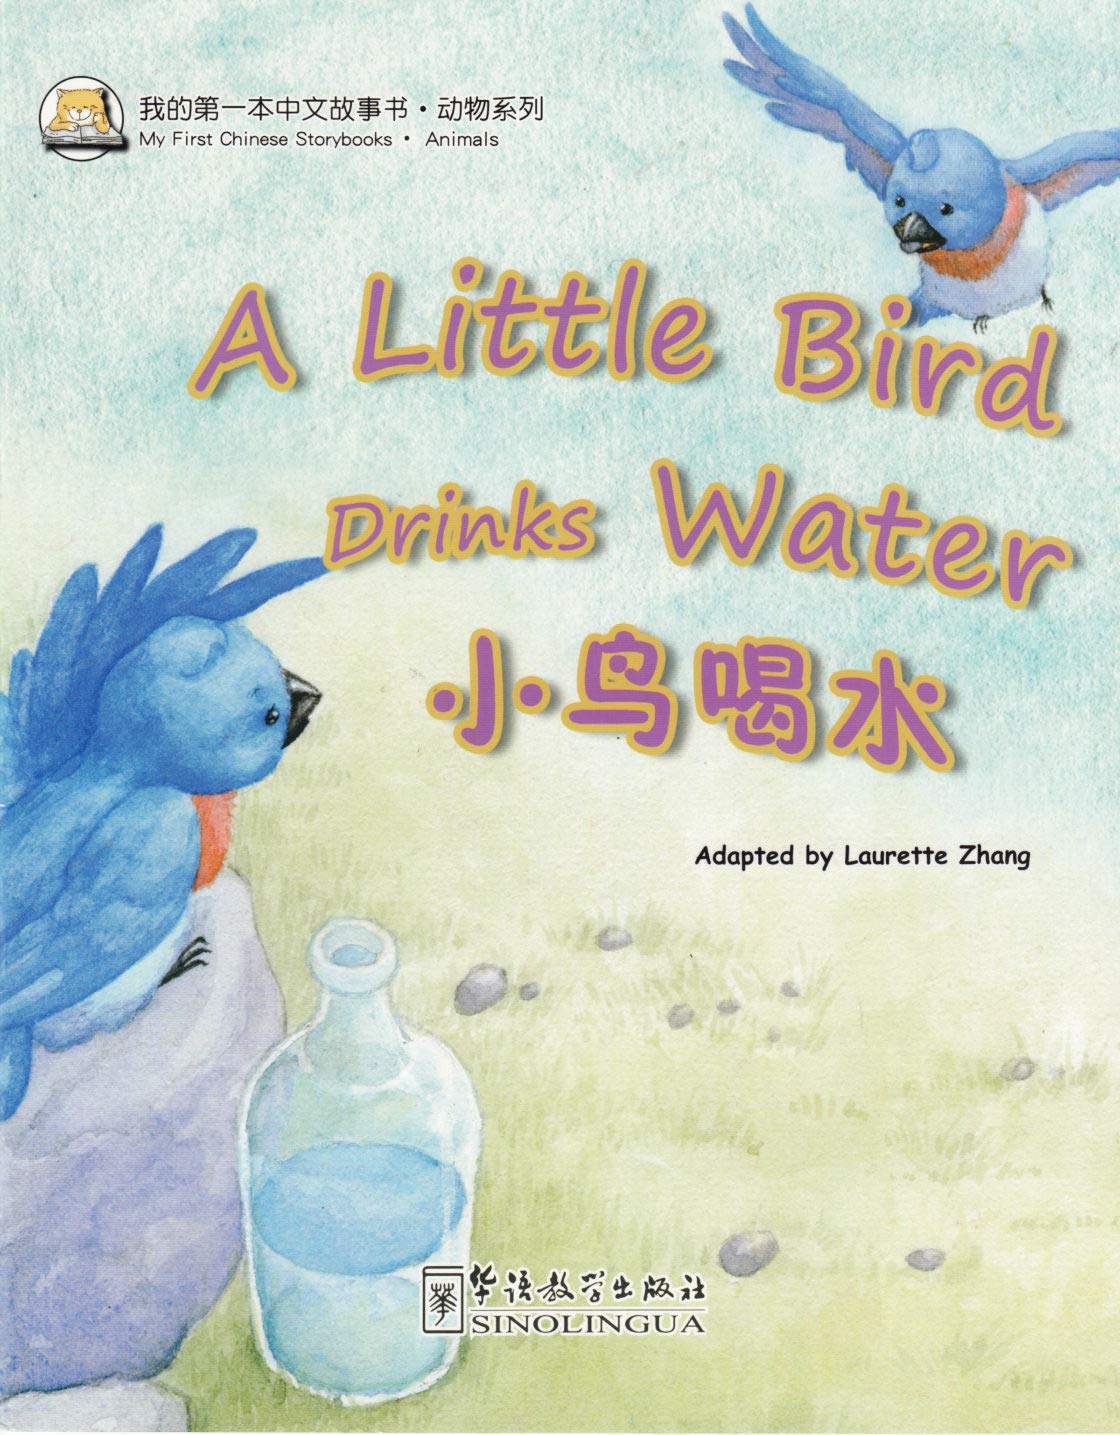 My First Chinese Storybooks: A Little Bird Drinks Water (English and Chinese Edition)